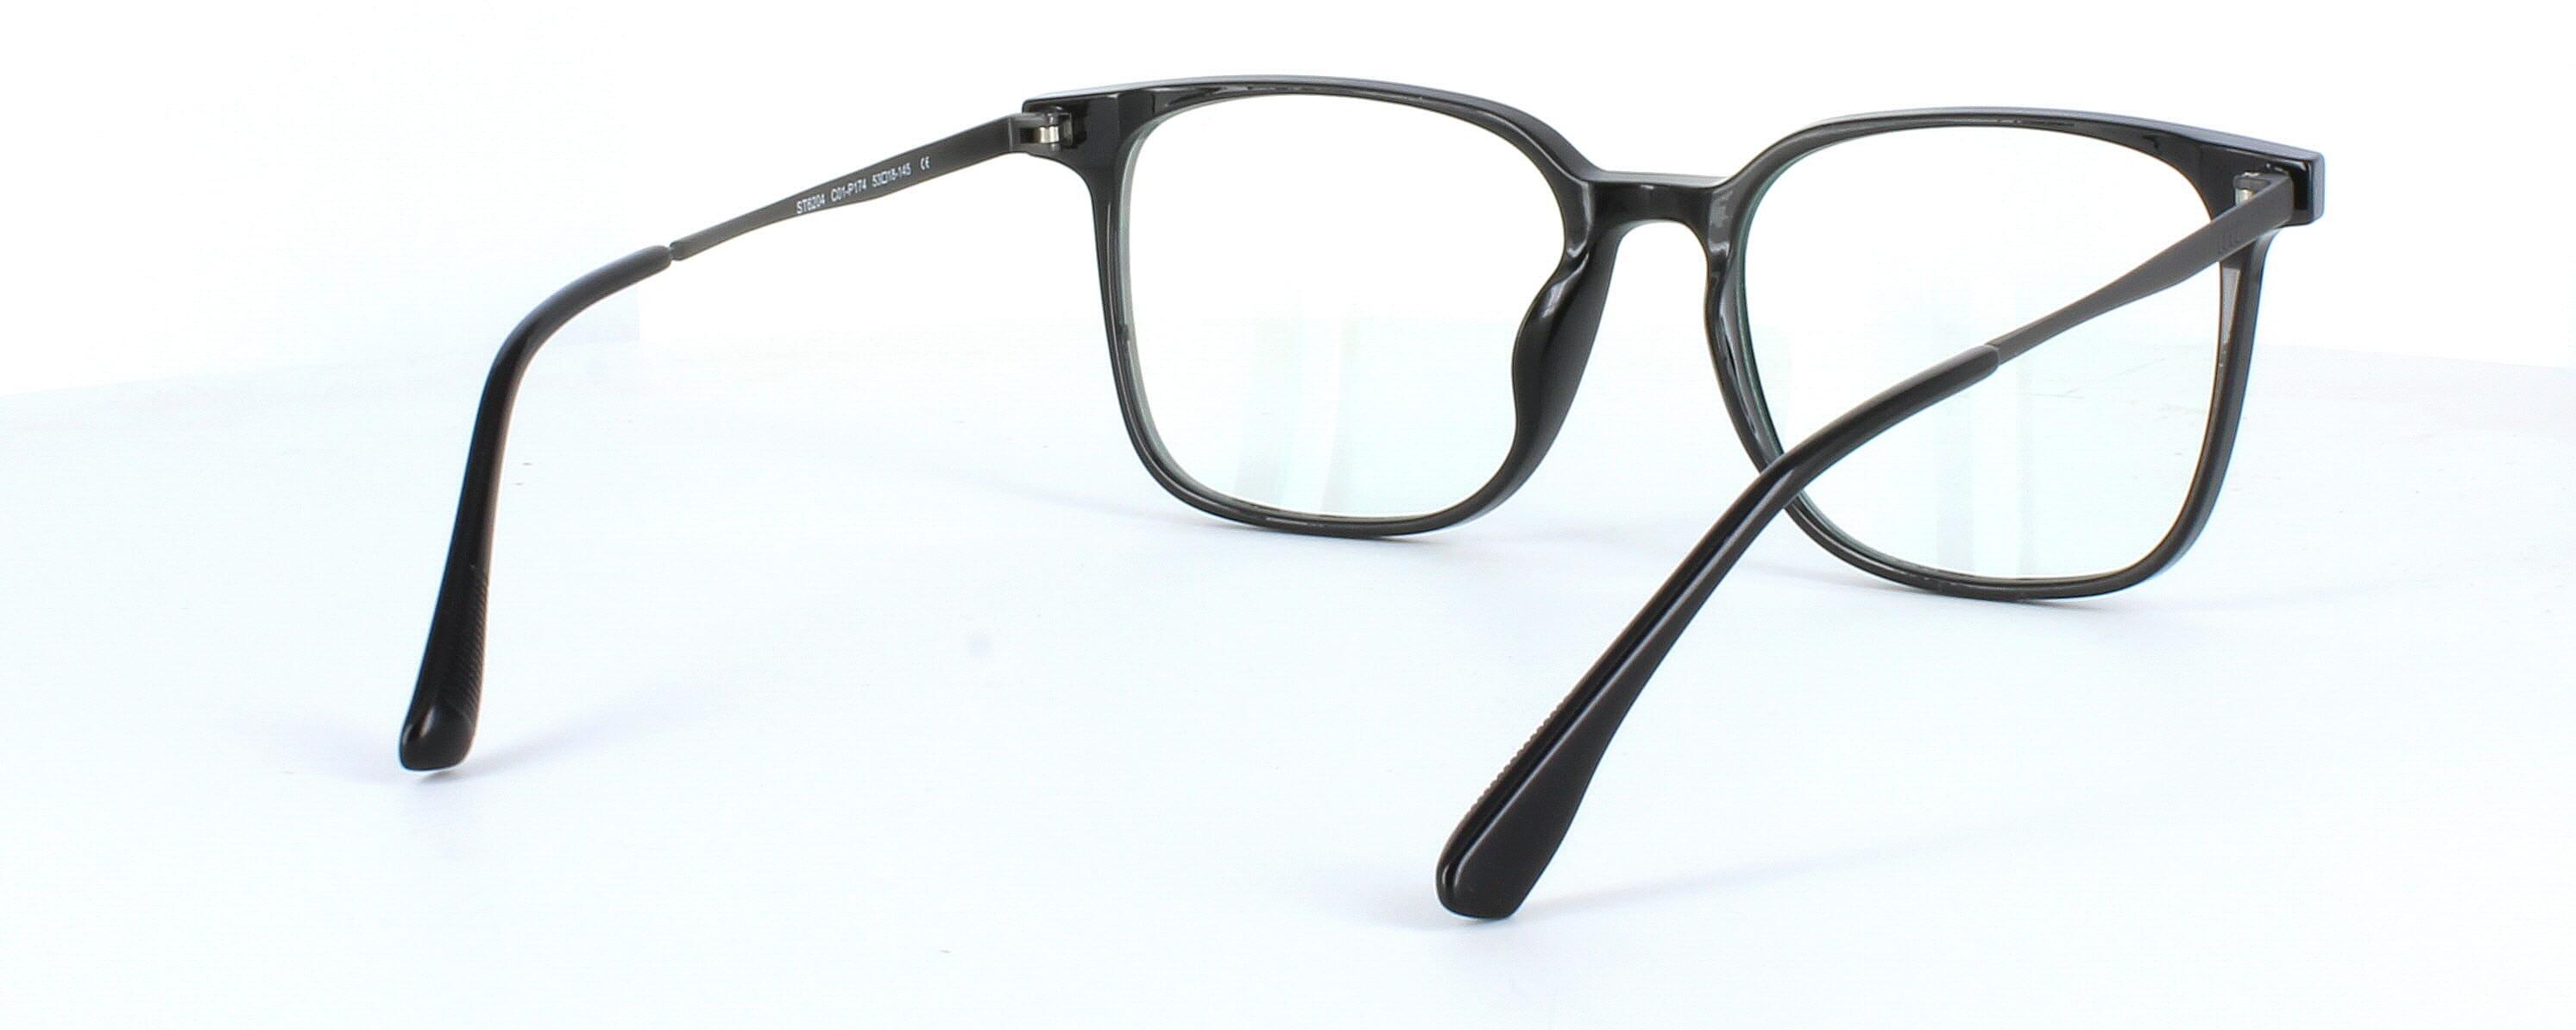 Edward Scotts ST6204 - Black - Gent's acetate retro style glasses frame with square shaped lenses and titanium arms - image view 5